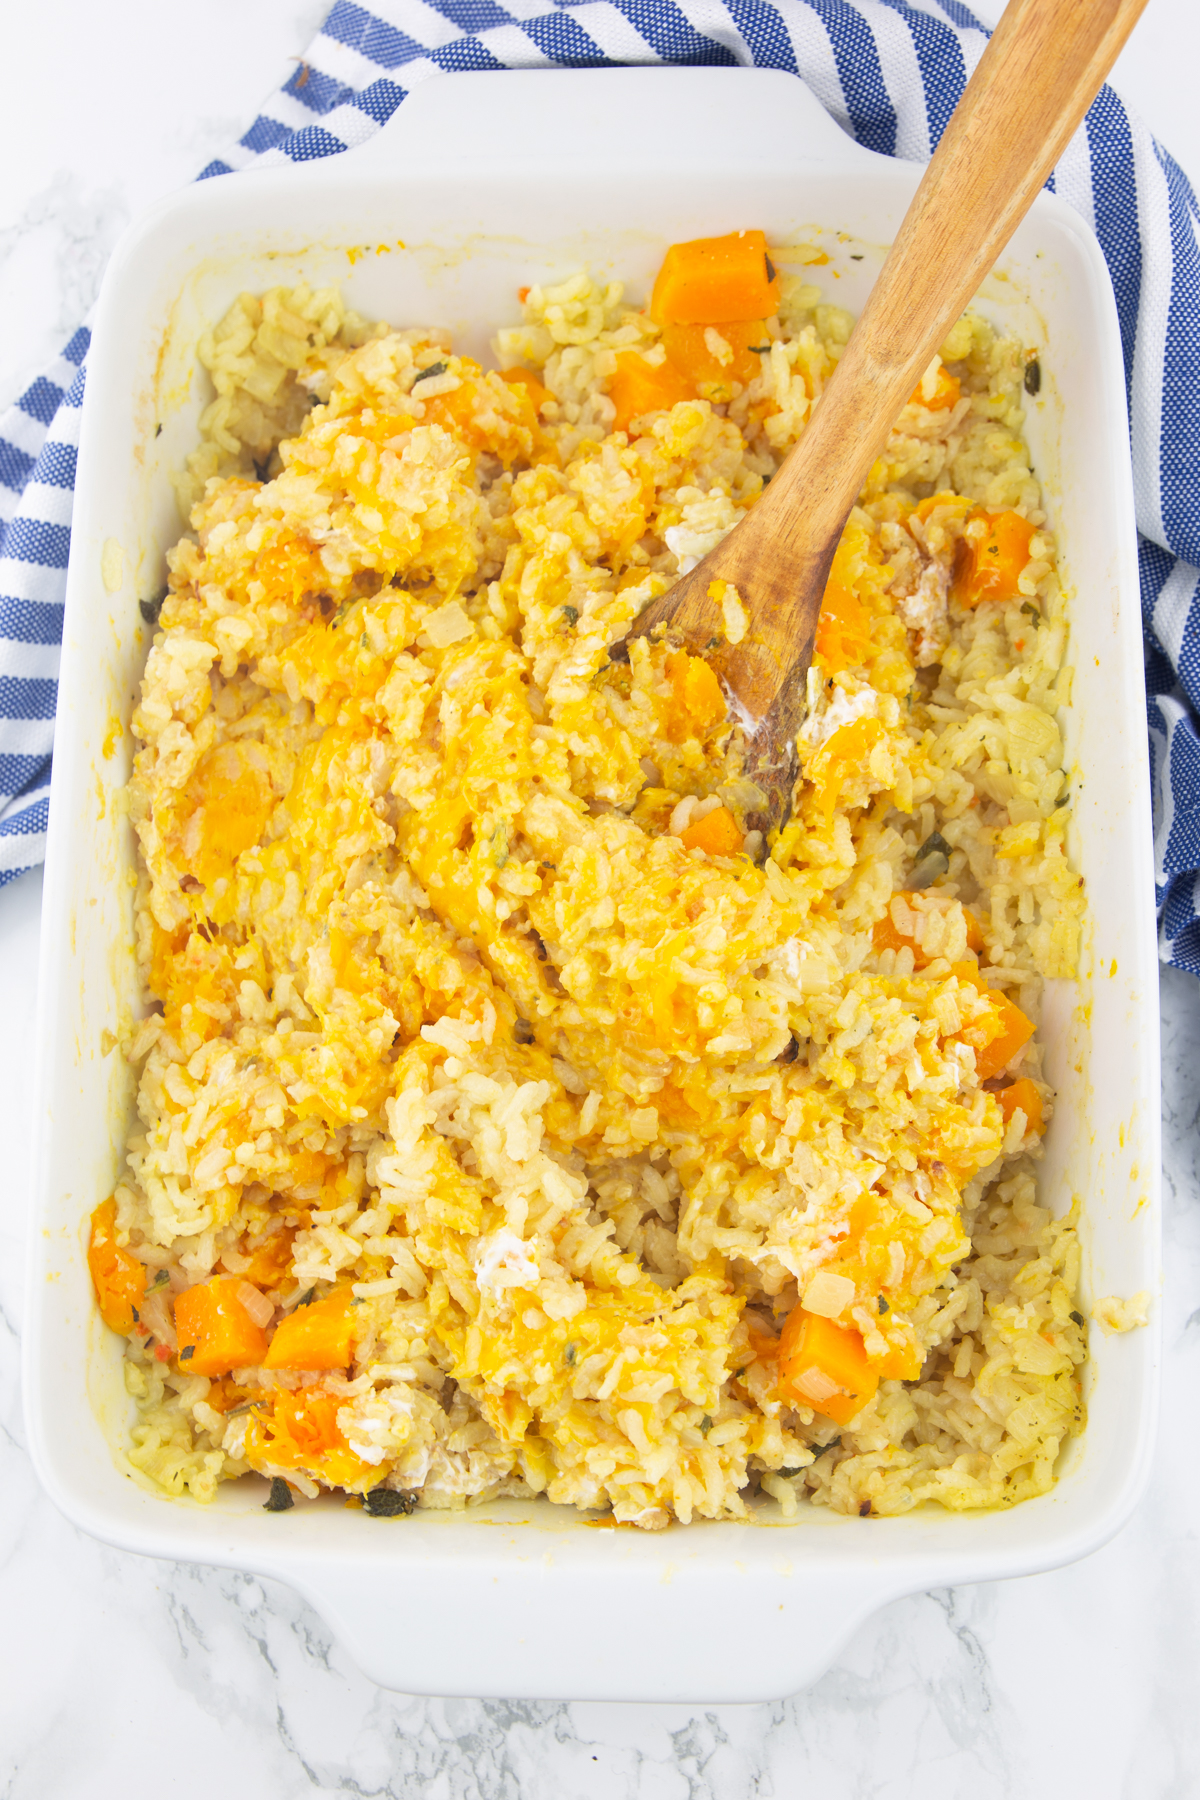 oven-baked risotto with butternut squash in a white casserole dish with a wooden spoon